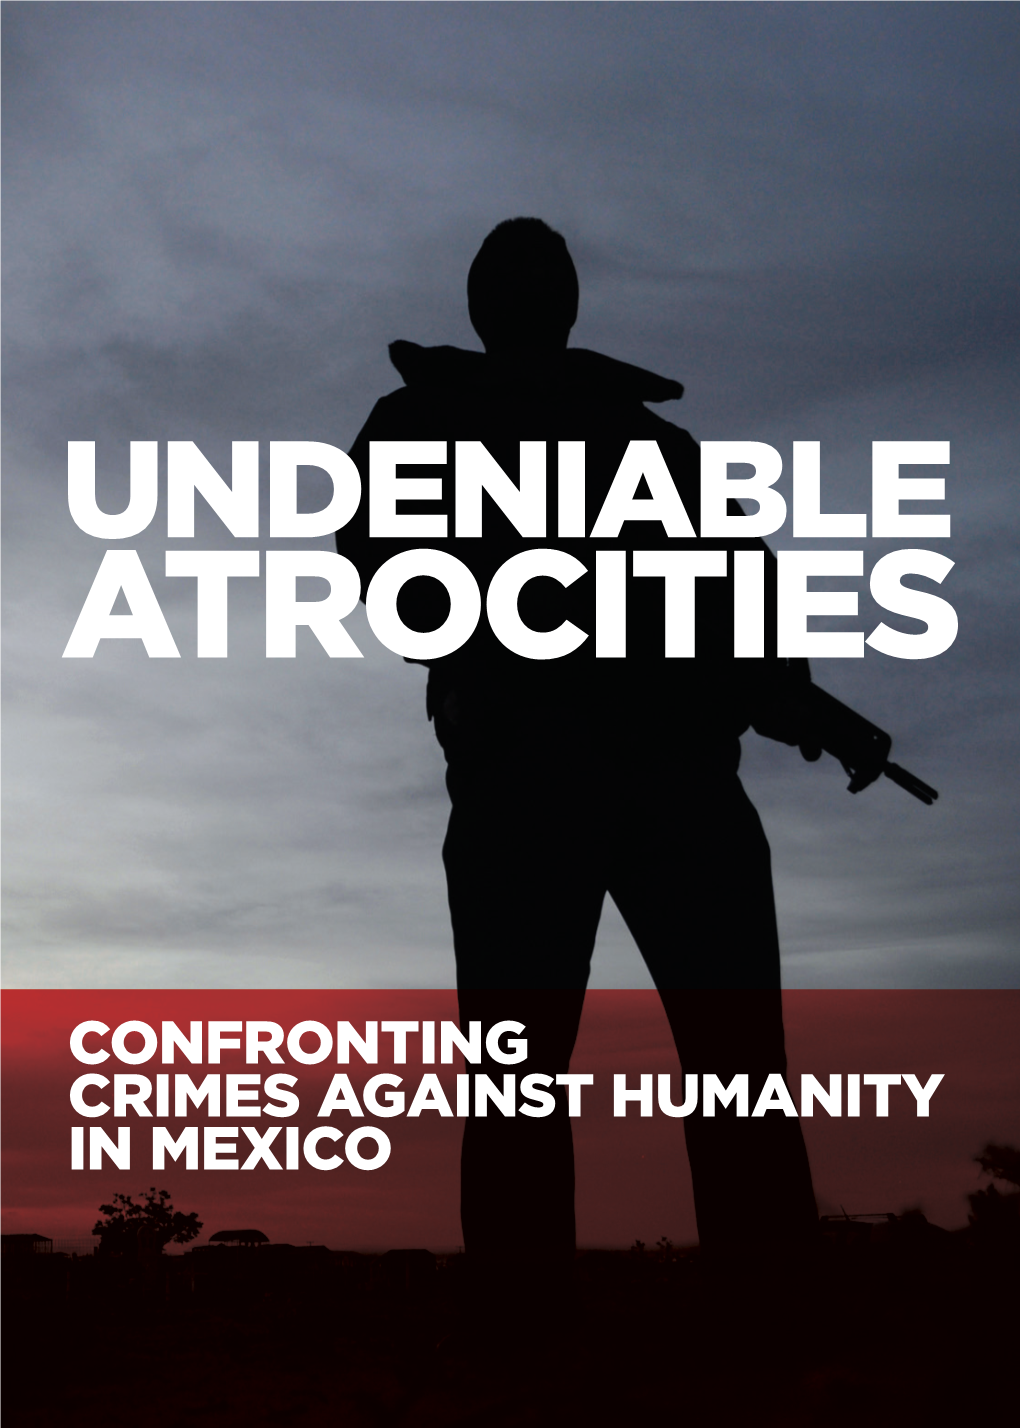 CONFRONTING CRIMES AGAINST HUMANITY in MEXICO Copyright © 2016 Open Society Foundations